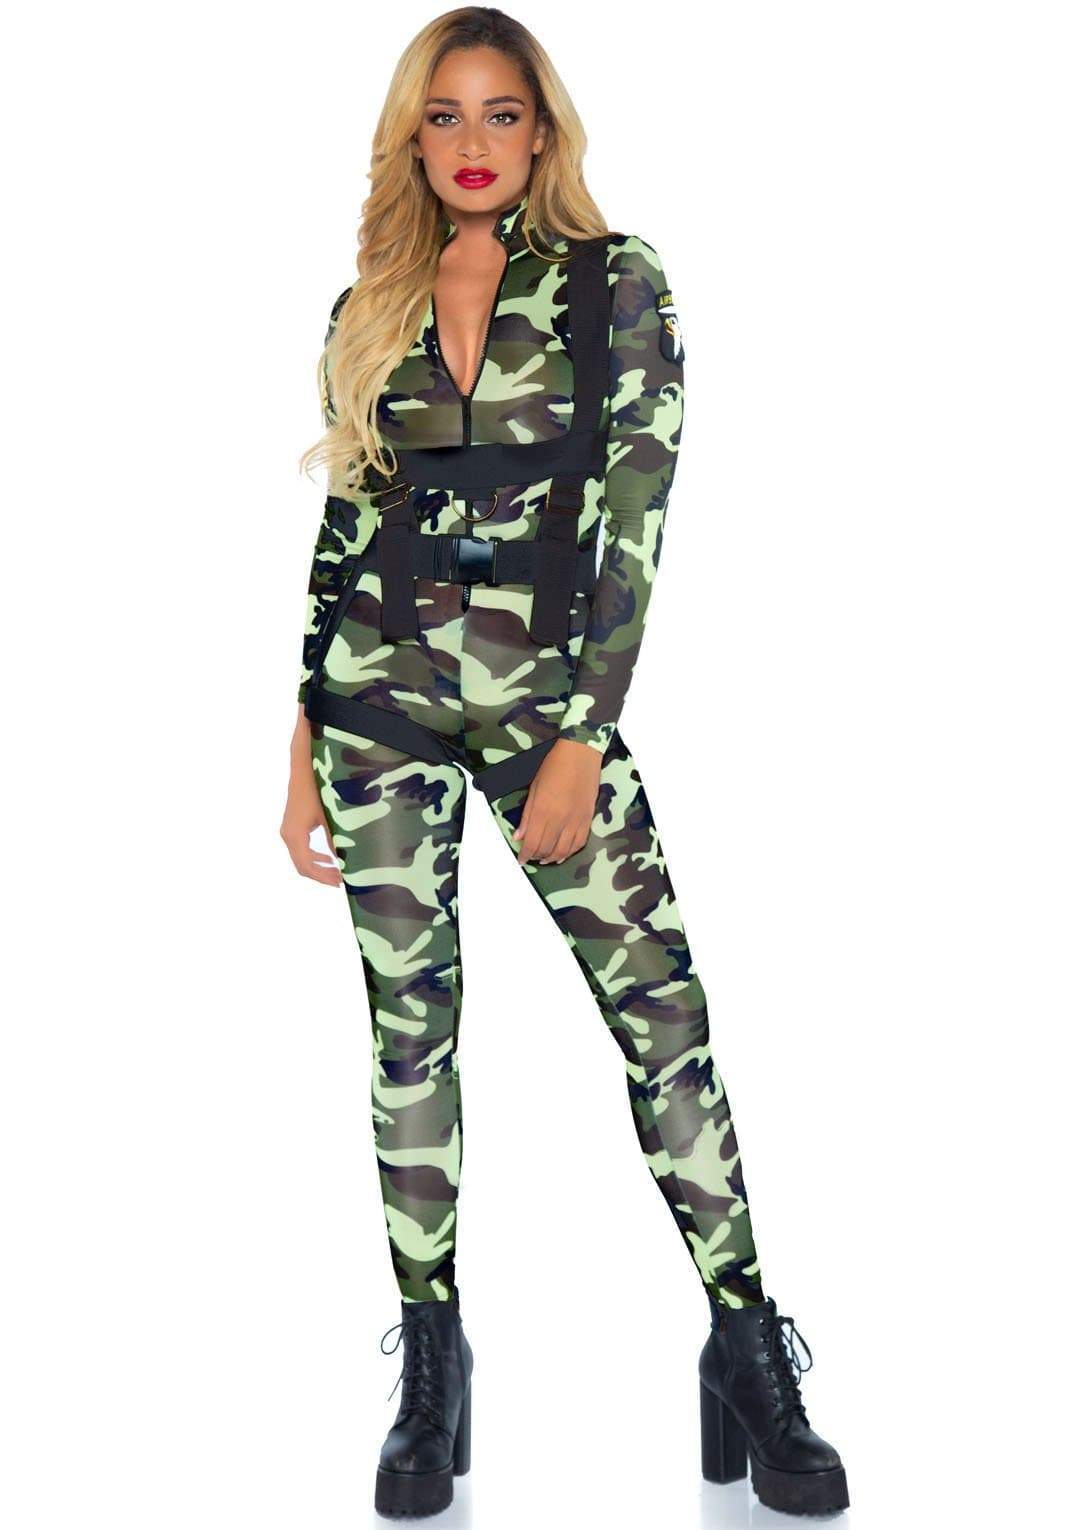 Paratrooper Military Camo Jumpsuit with Body Harness